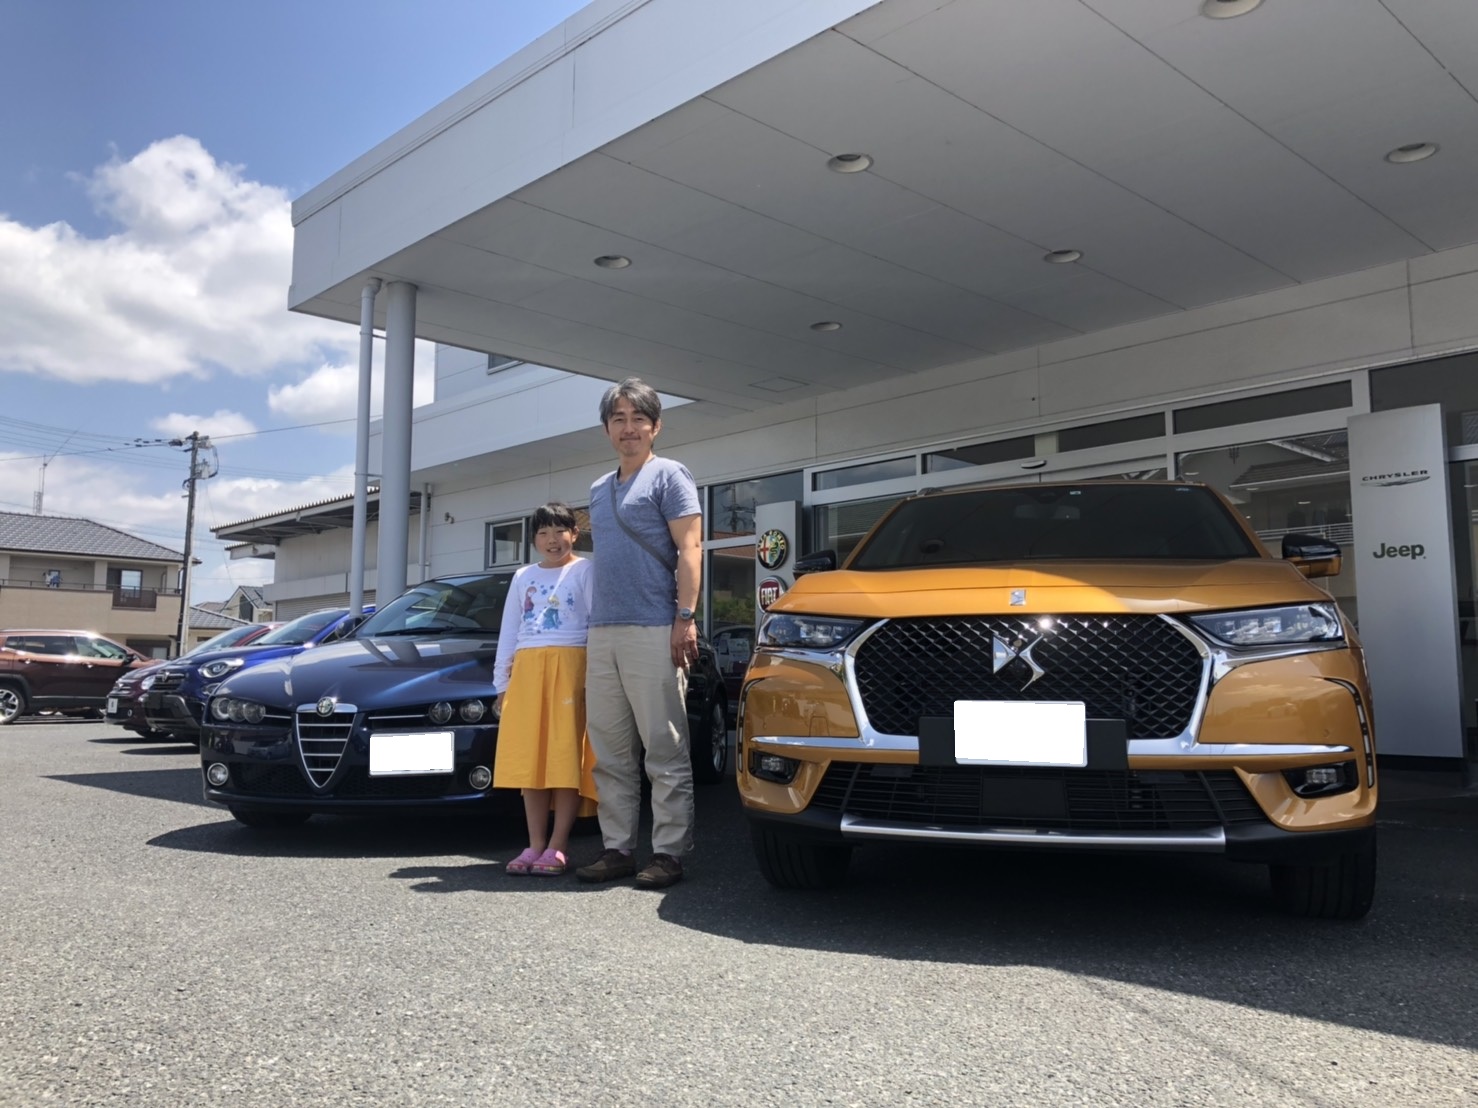 DS7 CROSSBACK ご納車in熊本！